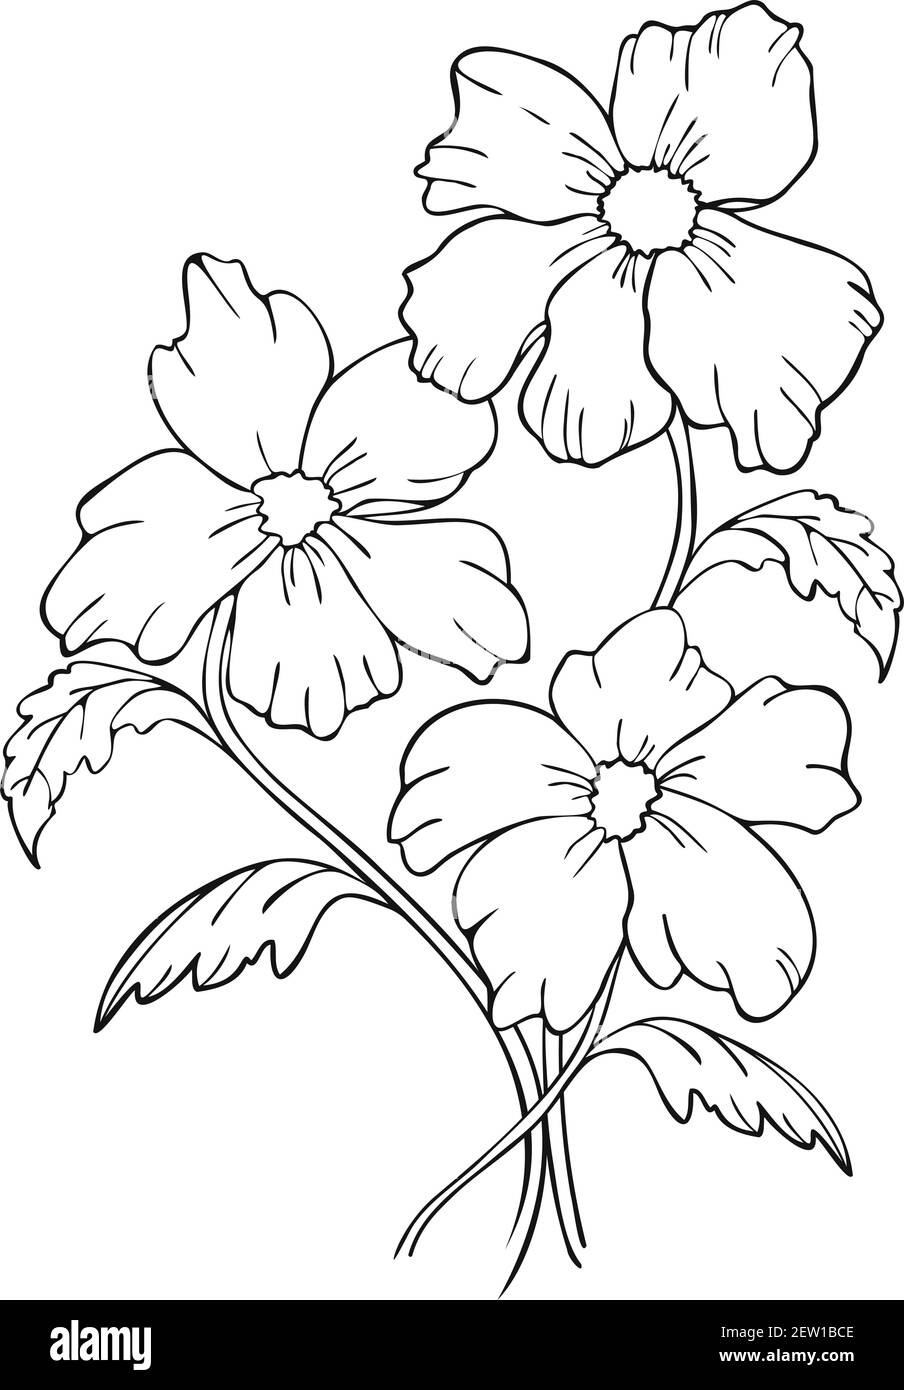 Vector illustration bouquet of black and white blooming flowers. Flowers silhouettes design for coloring book. Stock Vector